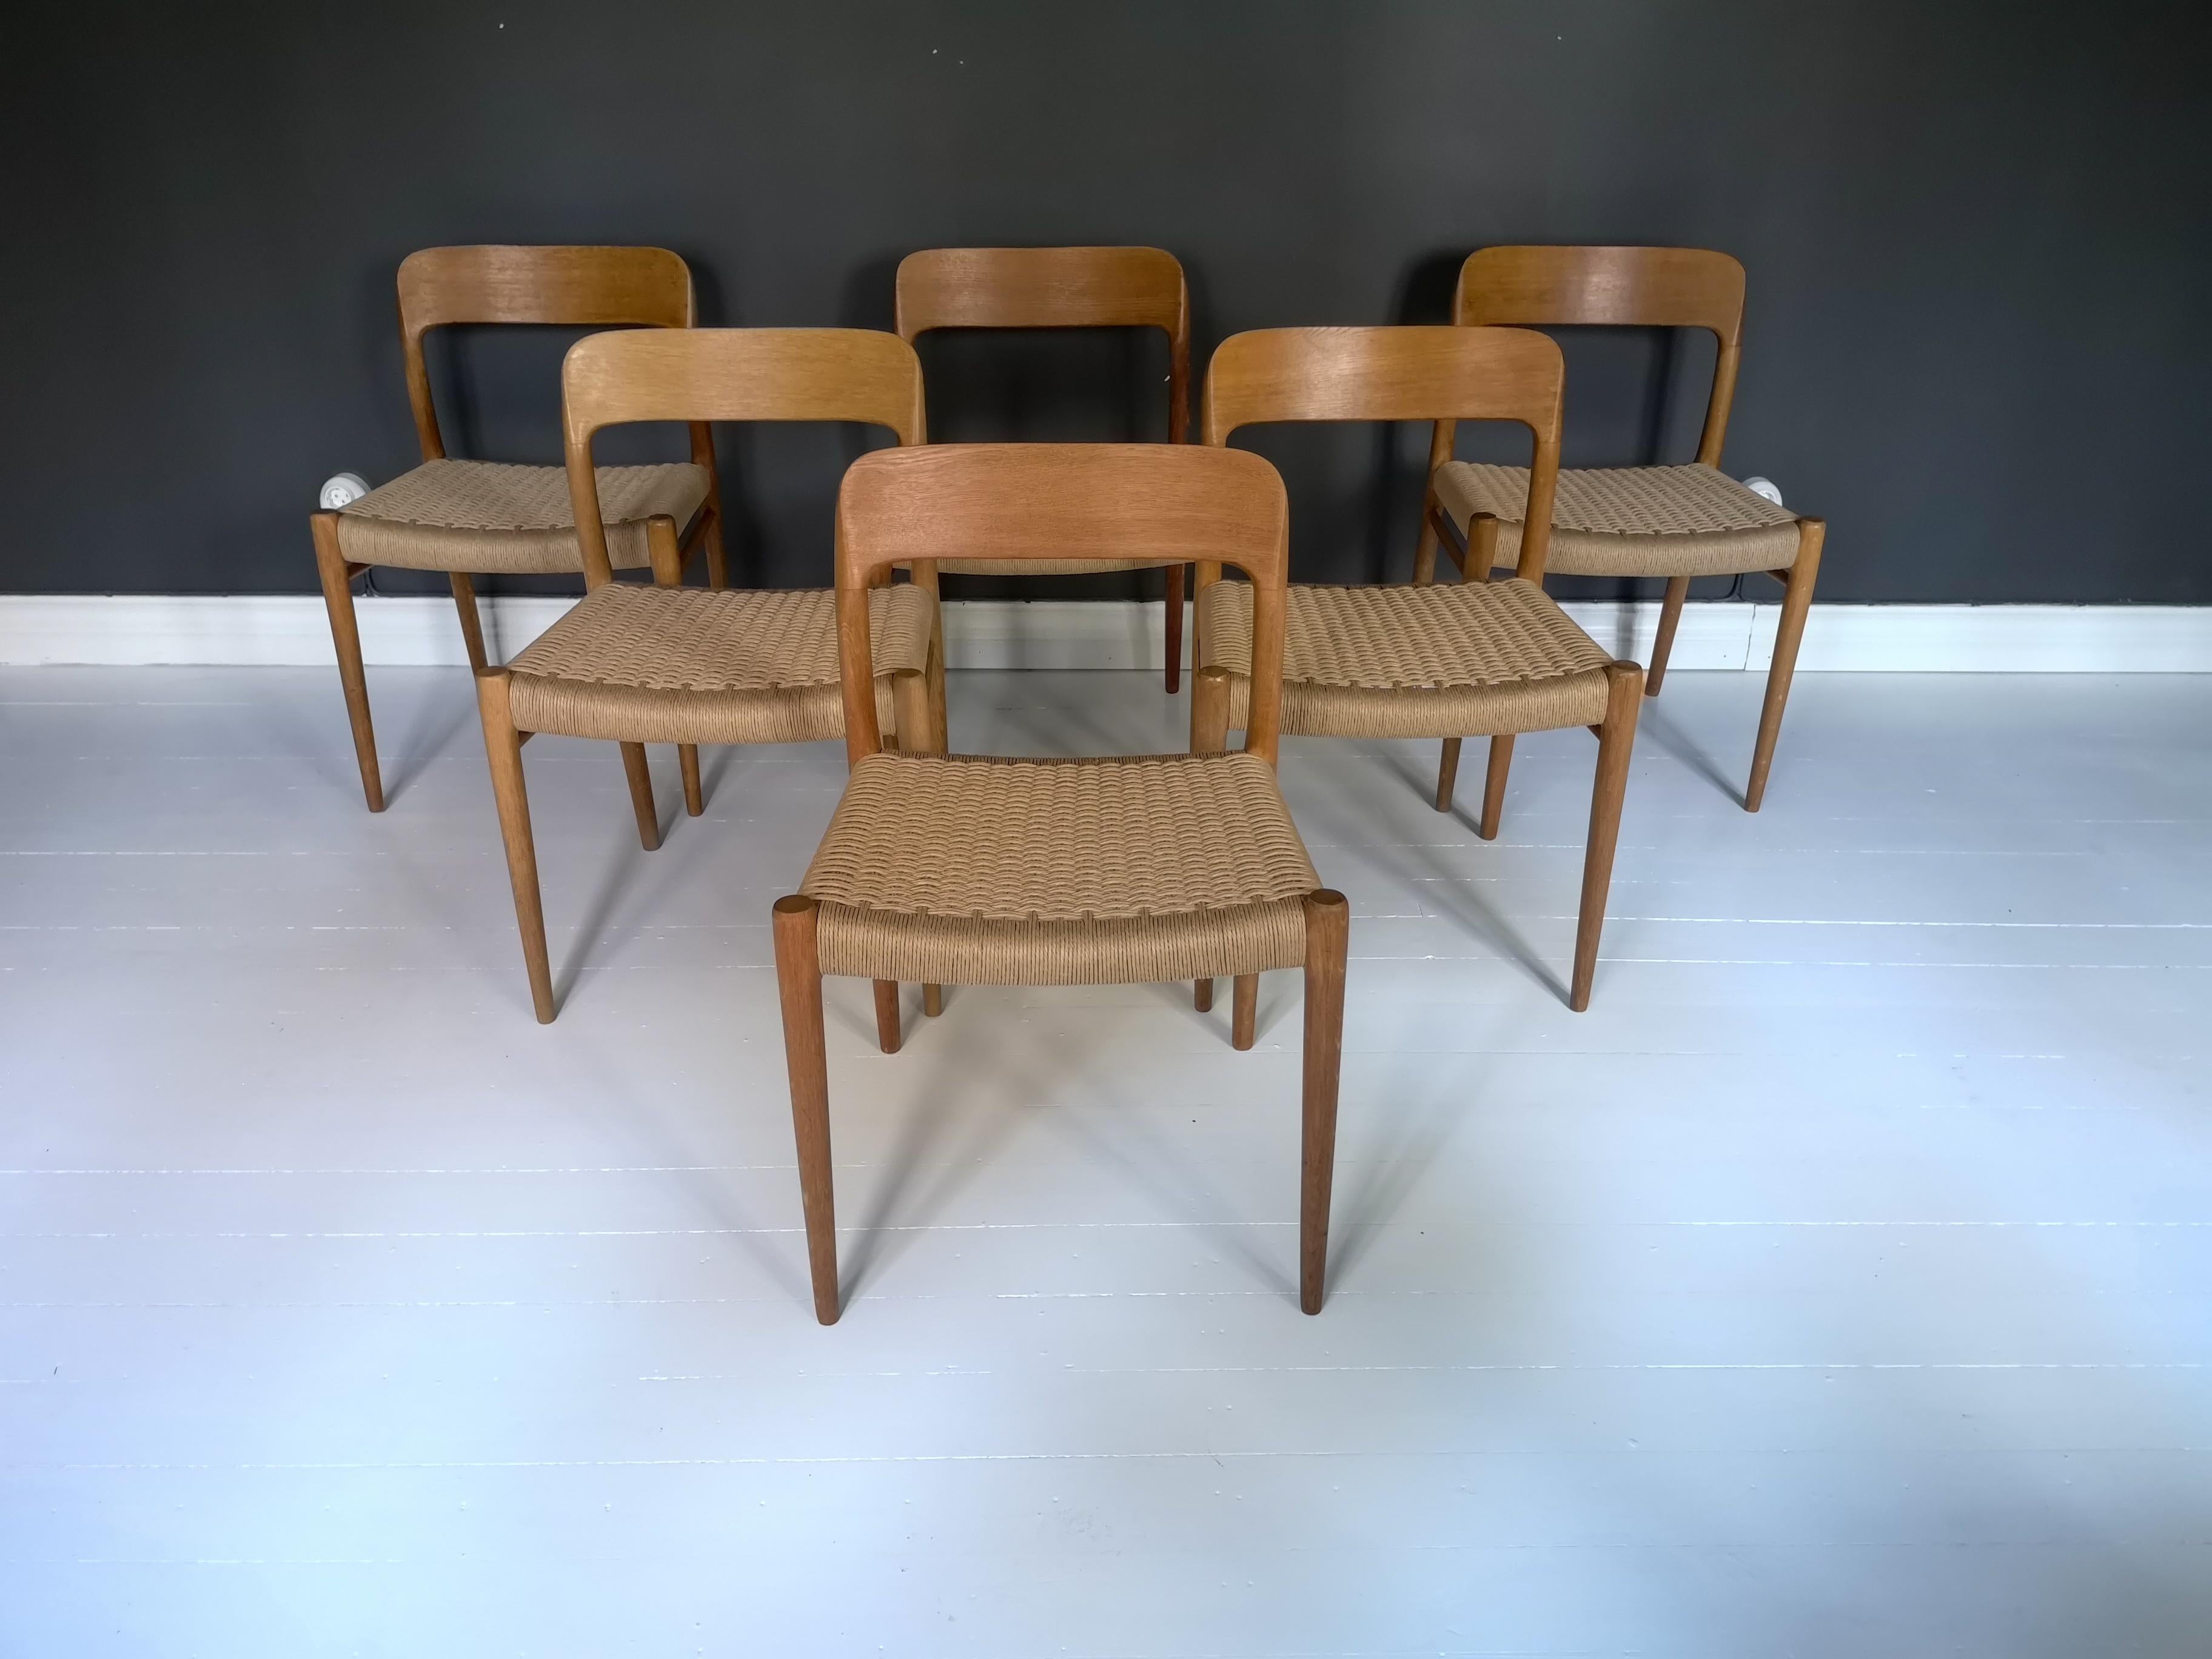 These beautiful set of dining chairs designed by Niels O. Møller, was manufactured by J.L. Møllers in Denmark. The set features 6 chairs of massive oak wood and paper cord seats, model 75, one of the
all-time great dining chairs to come out of the